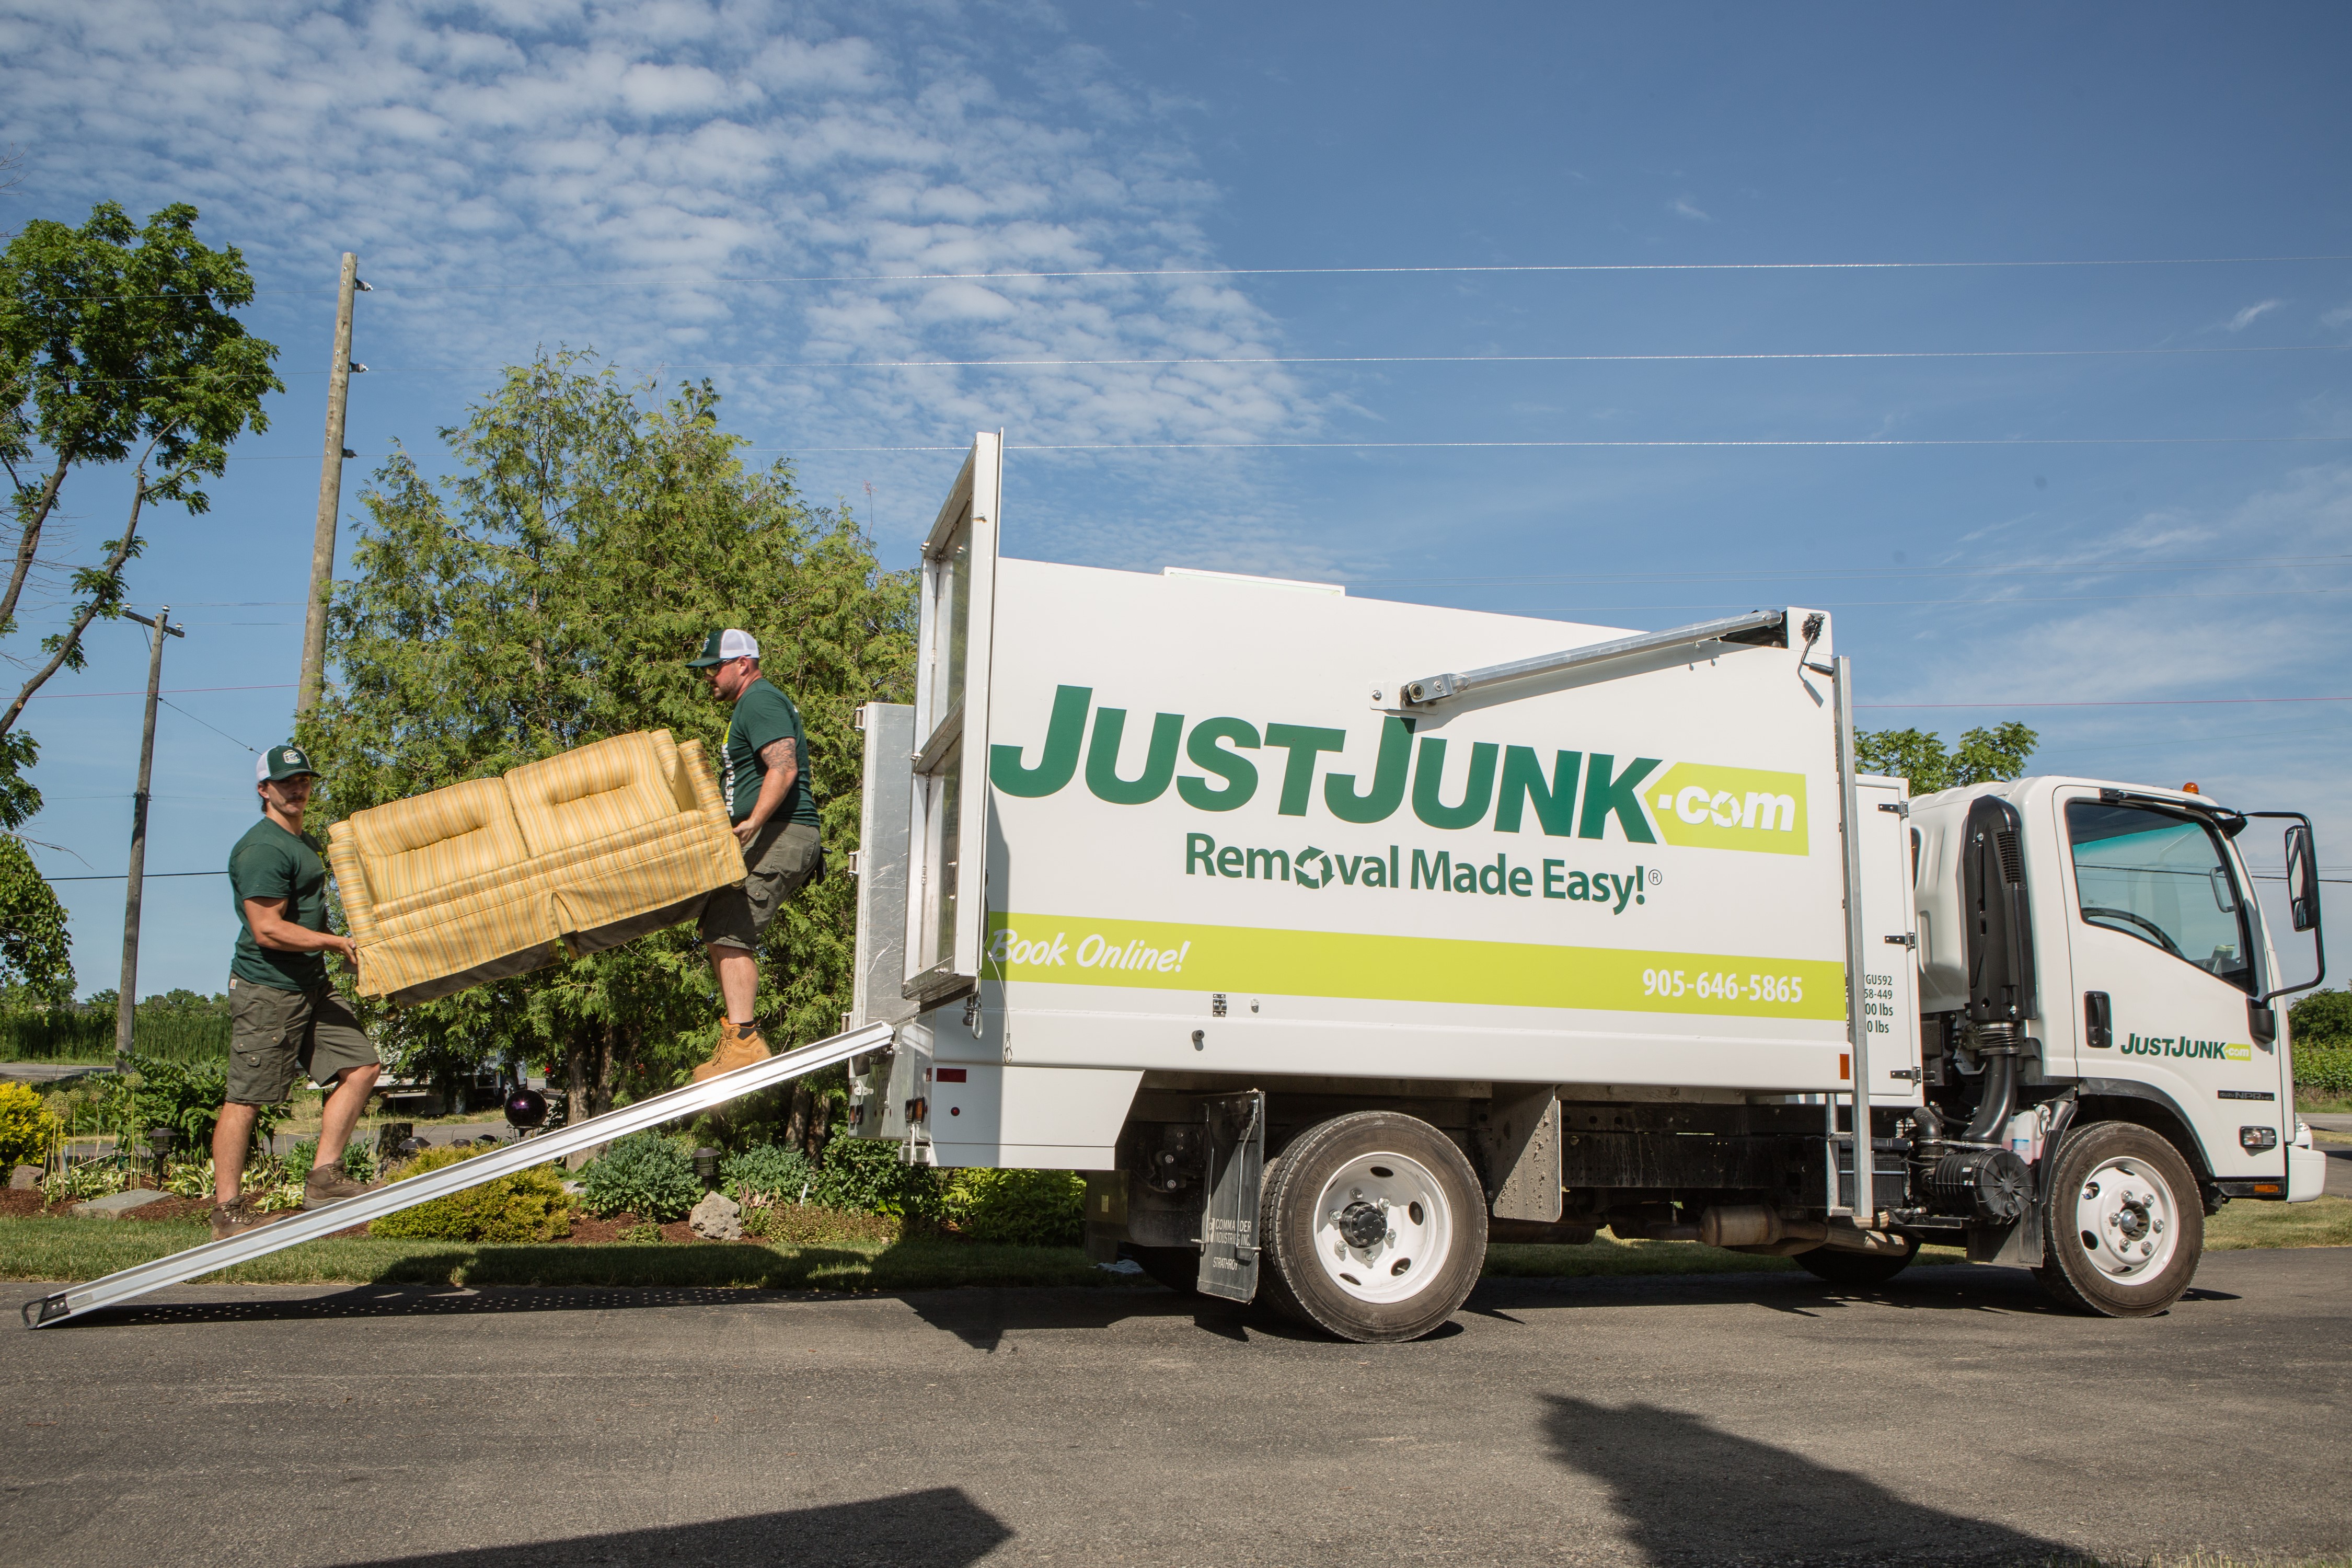 Just Junk - Junk Removal and Downsizing Mississauga